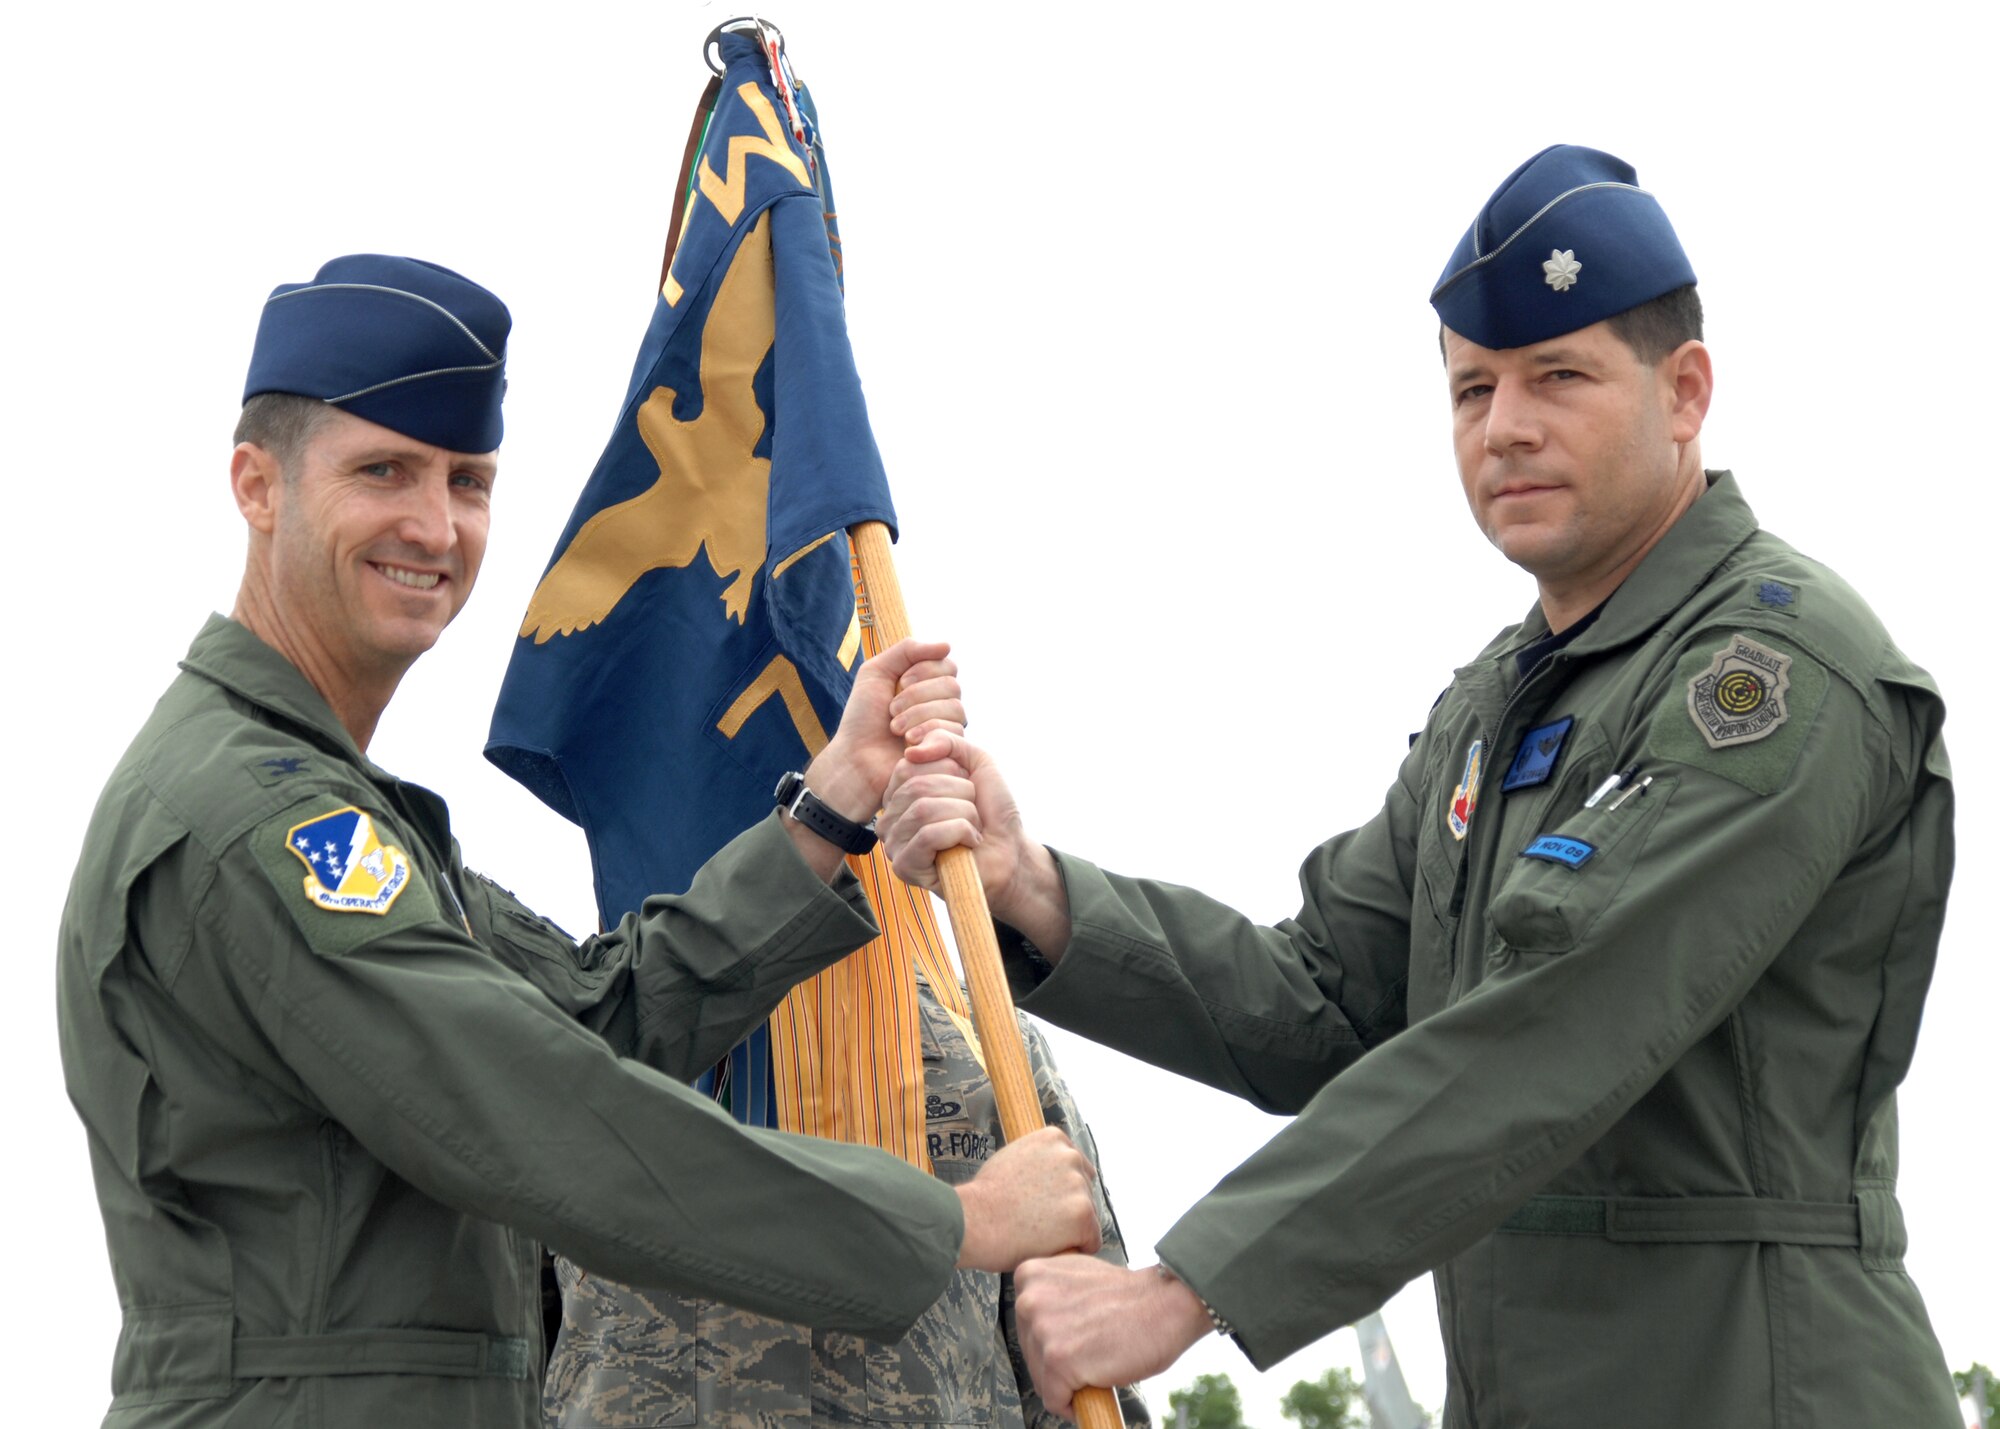 Col. Jack Forsythe, 49th Operations Group commander, hands off the guideon to Lt. Col. Mike Hernandez, incoming 7th Fighter Squadron commander, during the squadron's activation ceremony, May 16 at Holloman Air Force Base, N.M. The 7th FS was reactivated in preparation for the arrival of the F-22A Raptor. (U.S. Air Force photo/Airman 1st Class Jamal Sutter)